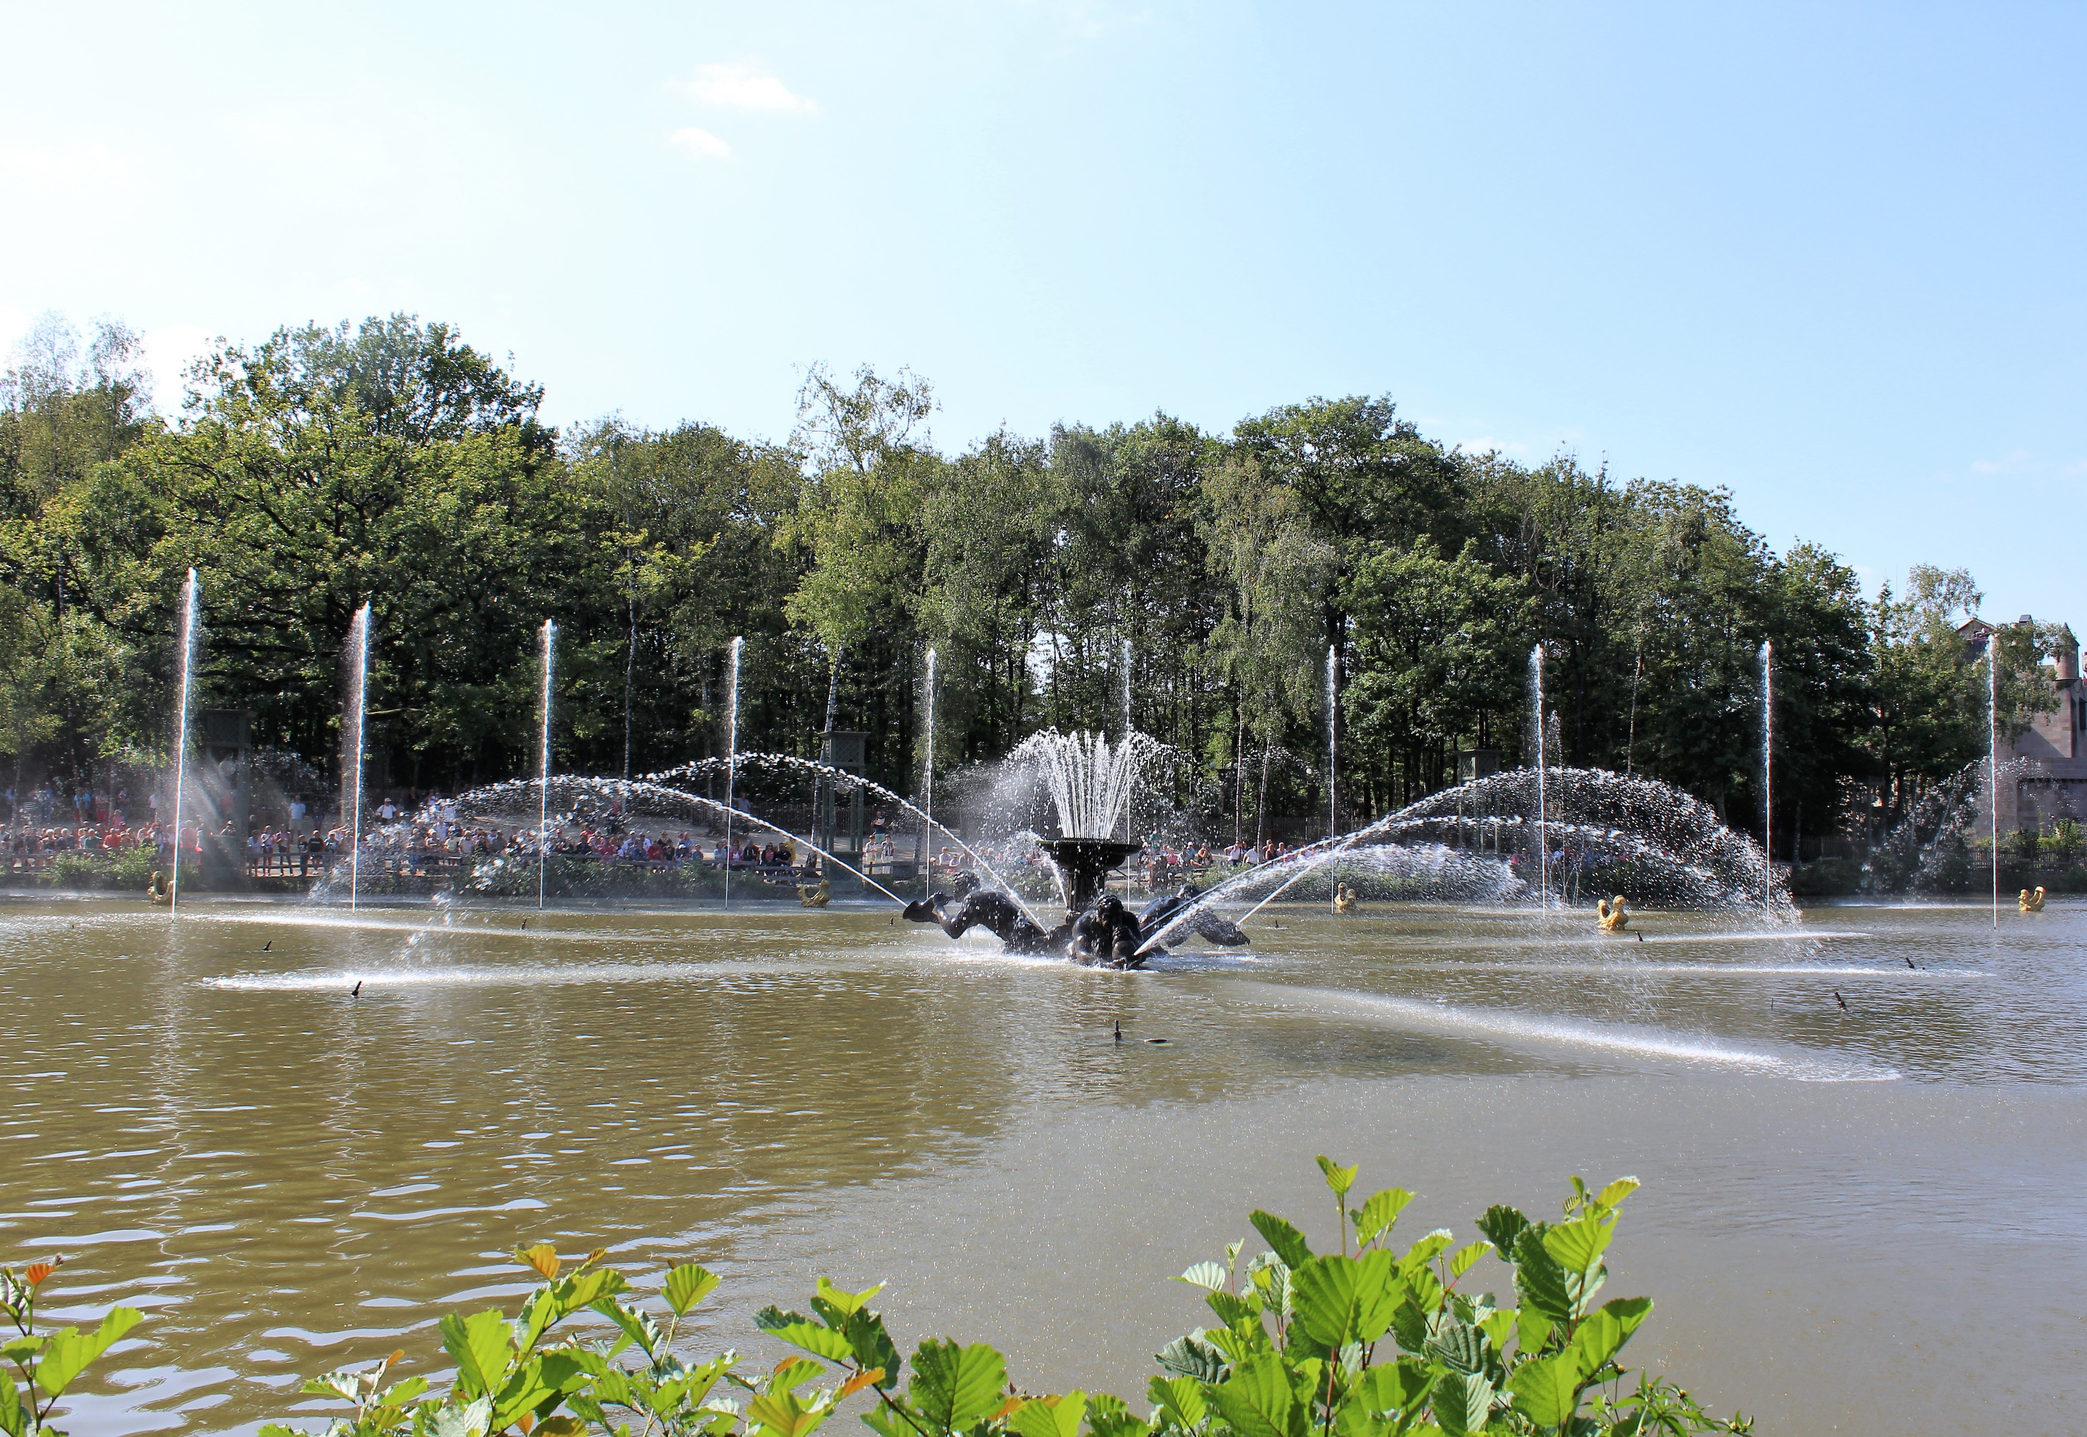 Photo taken on August 31, 2018 in the village "Les Epesses" in the Vendée showing magnificent fountains on the Puy du Fou lake.